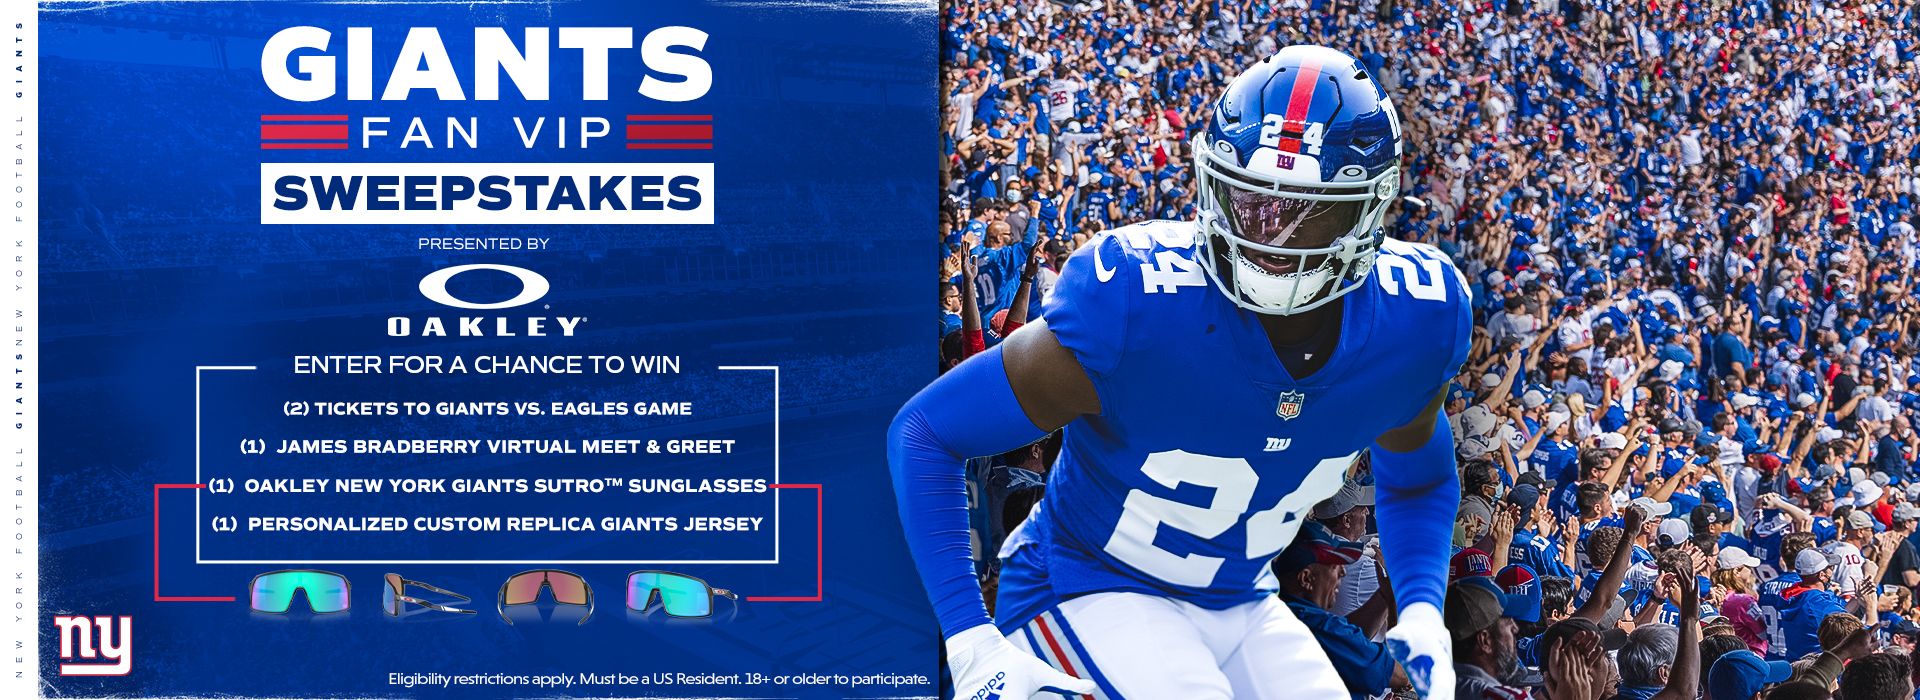 giants football game tickets